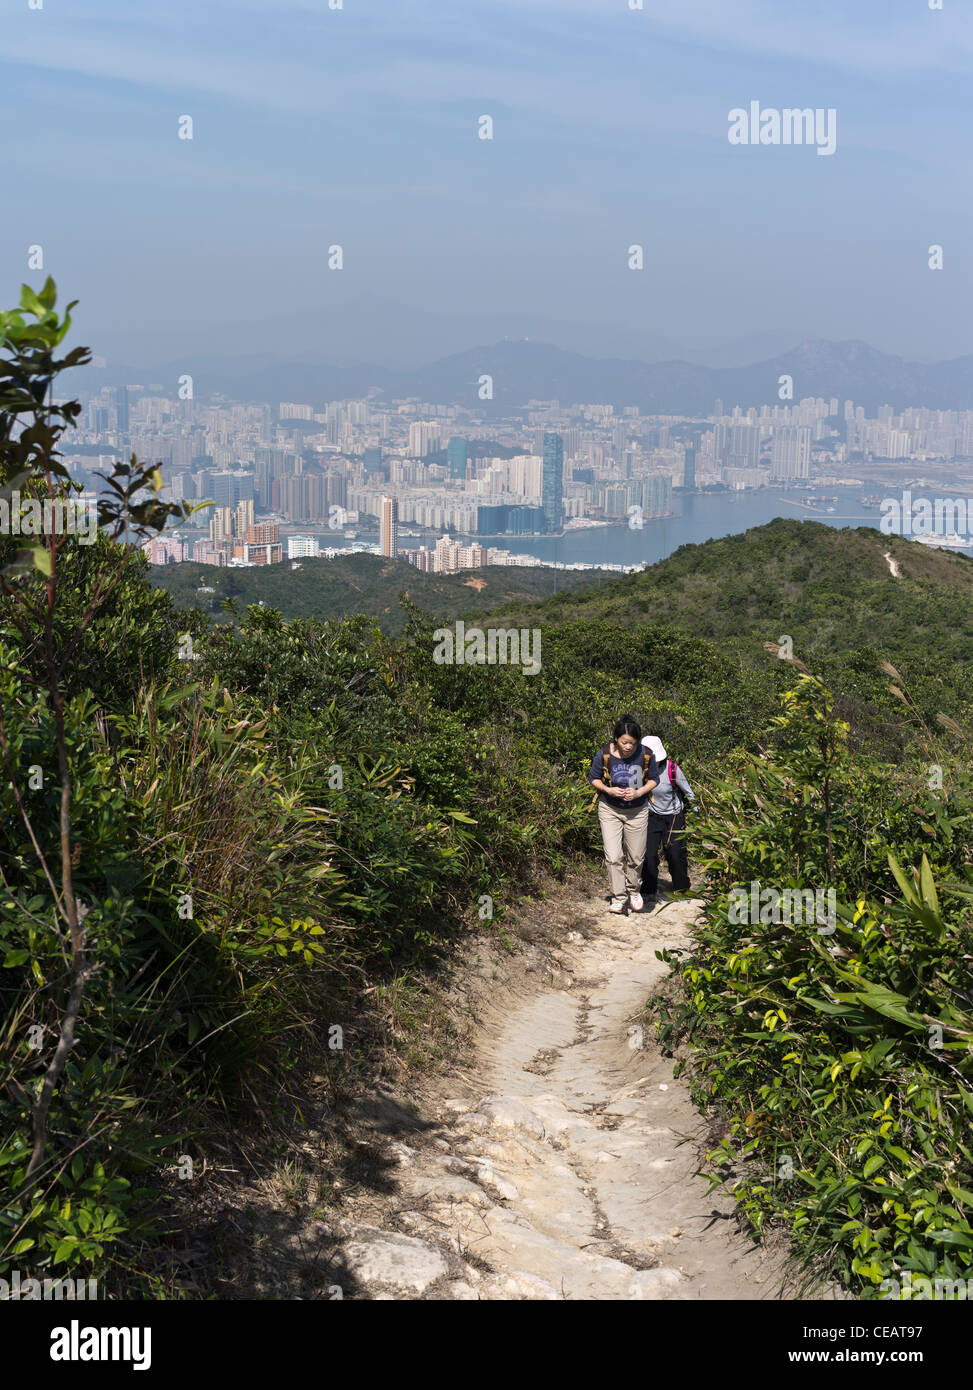 dh Braemar hill footpath QUARRY BAY HONG KONG Two Chinese girl hikers walking footpaths in hills hiking trail island hike Stock Photo